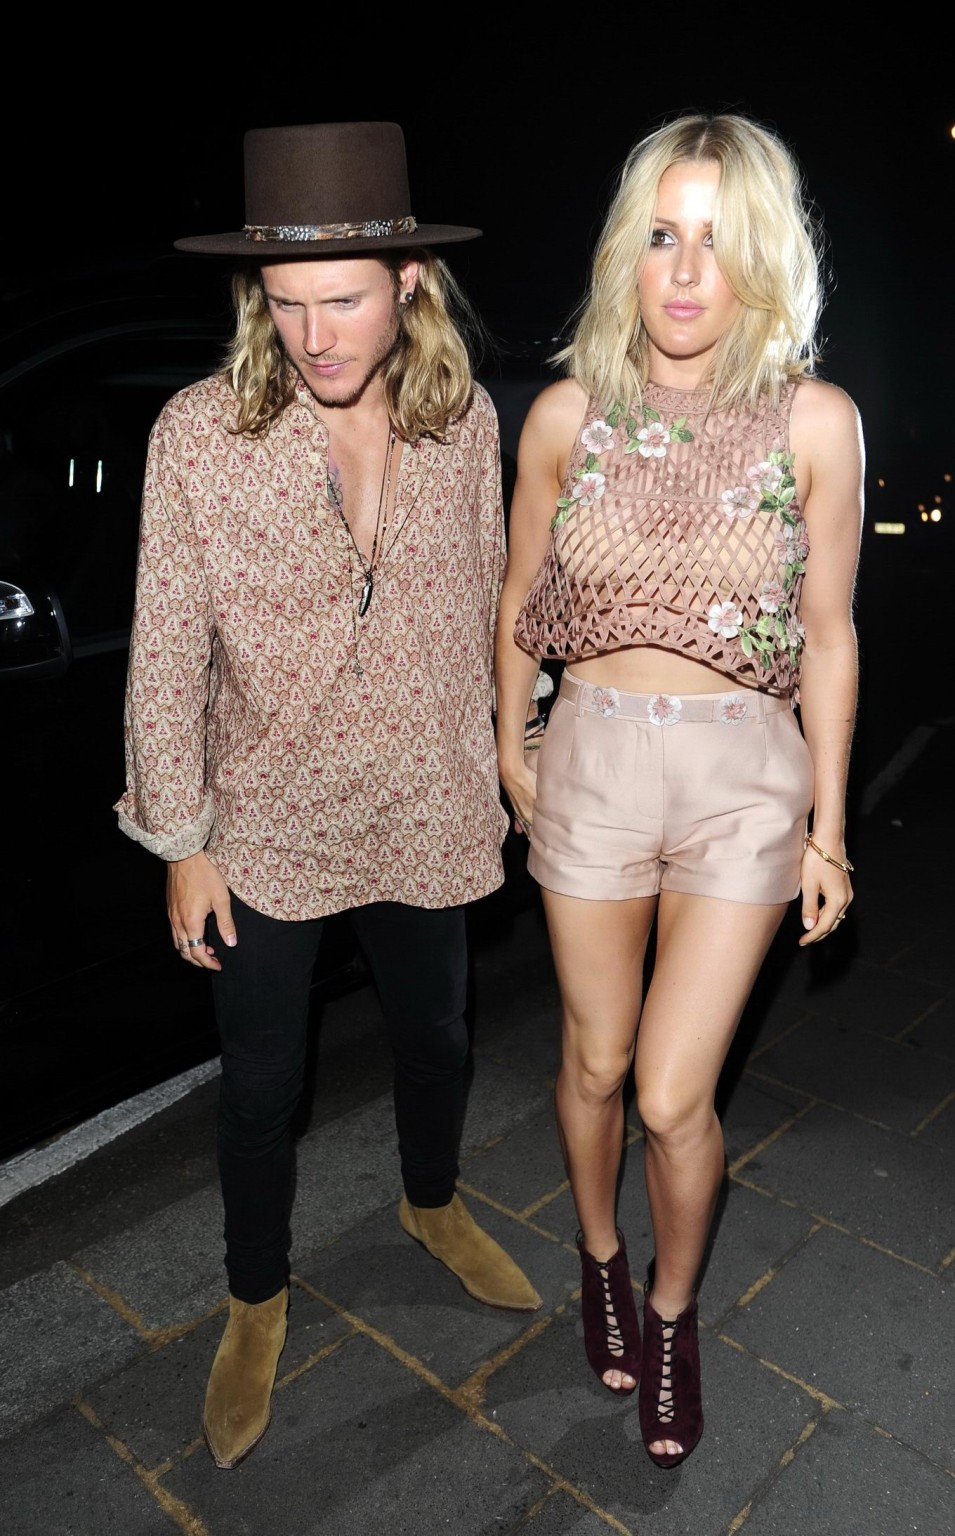 Ellie goulding leggy see through to bra out in london
 #75164075